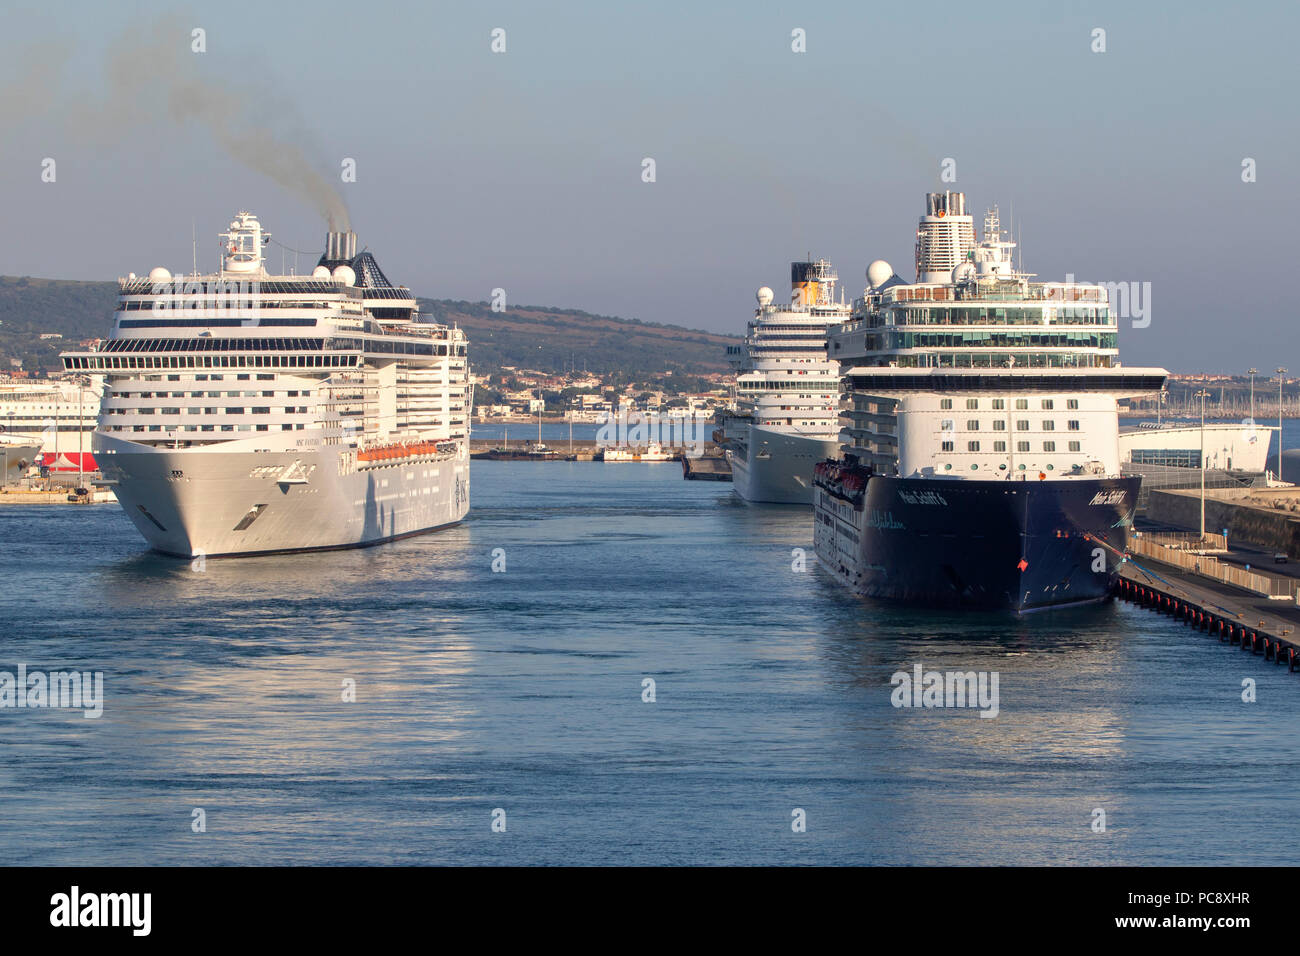 MSC Fantasia cruise ship owned by MSC Cruises, Mein Schiff 6 cruise ship owned by TUI Cruises and Costa Diadema all 3 seen at Civitavecchia in Italy Stock Photo